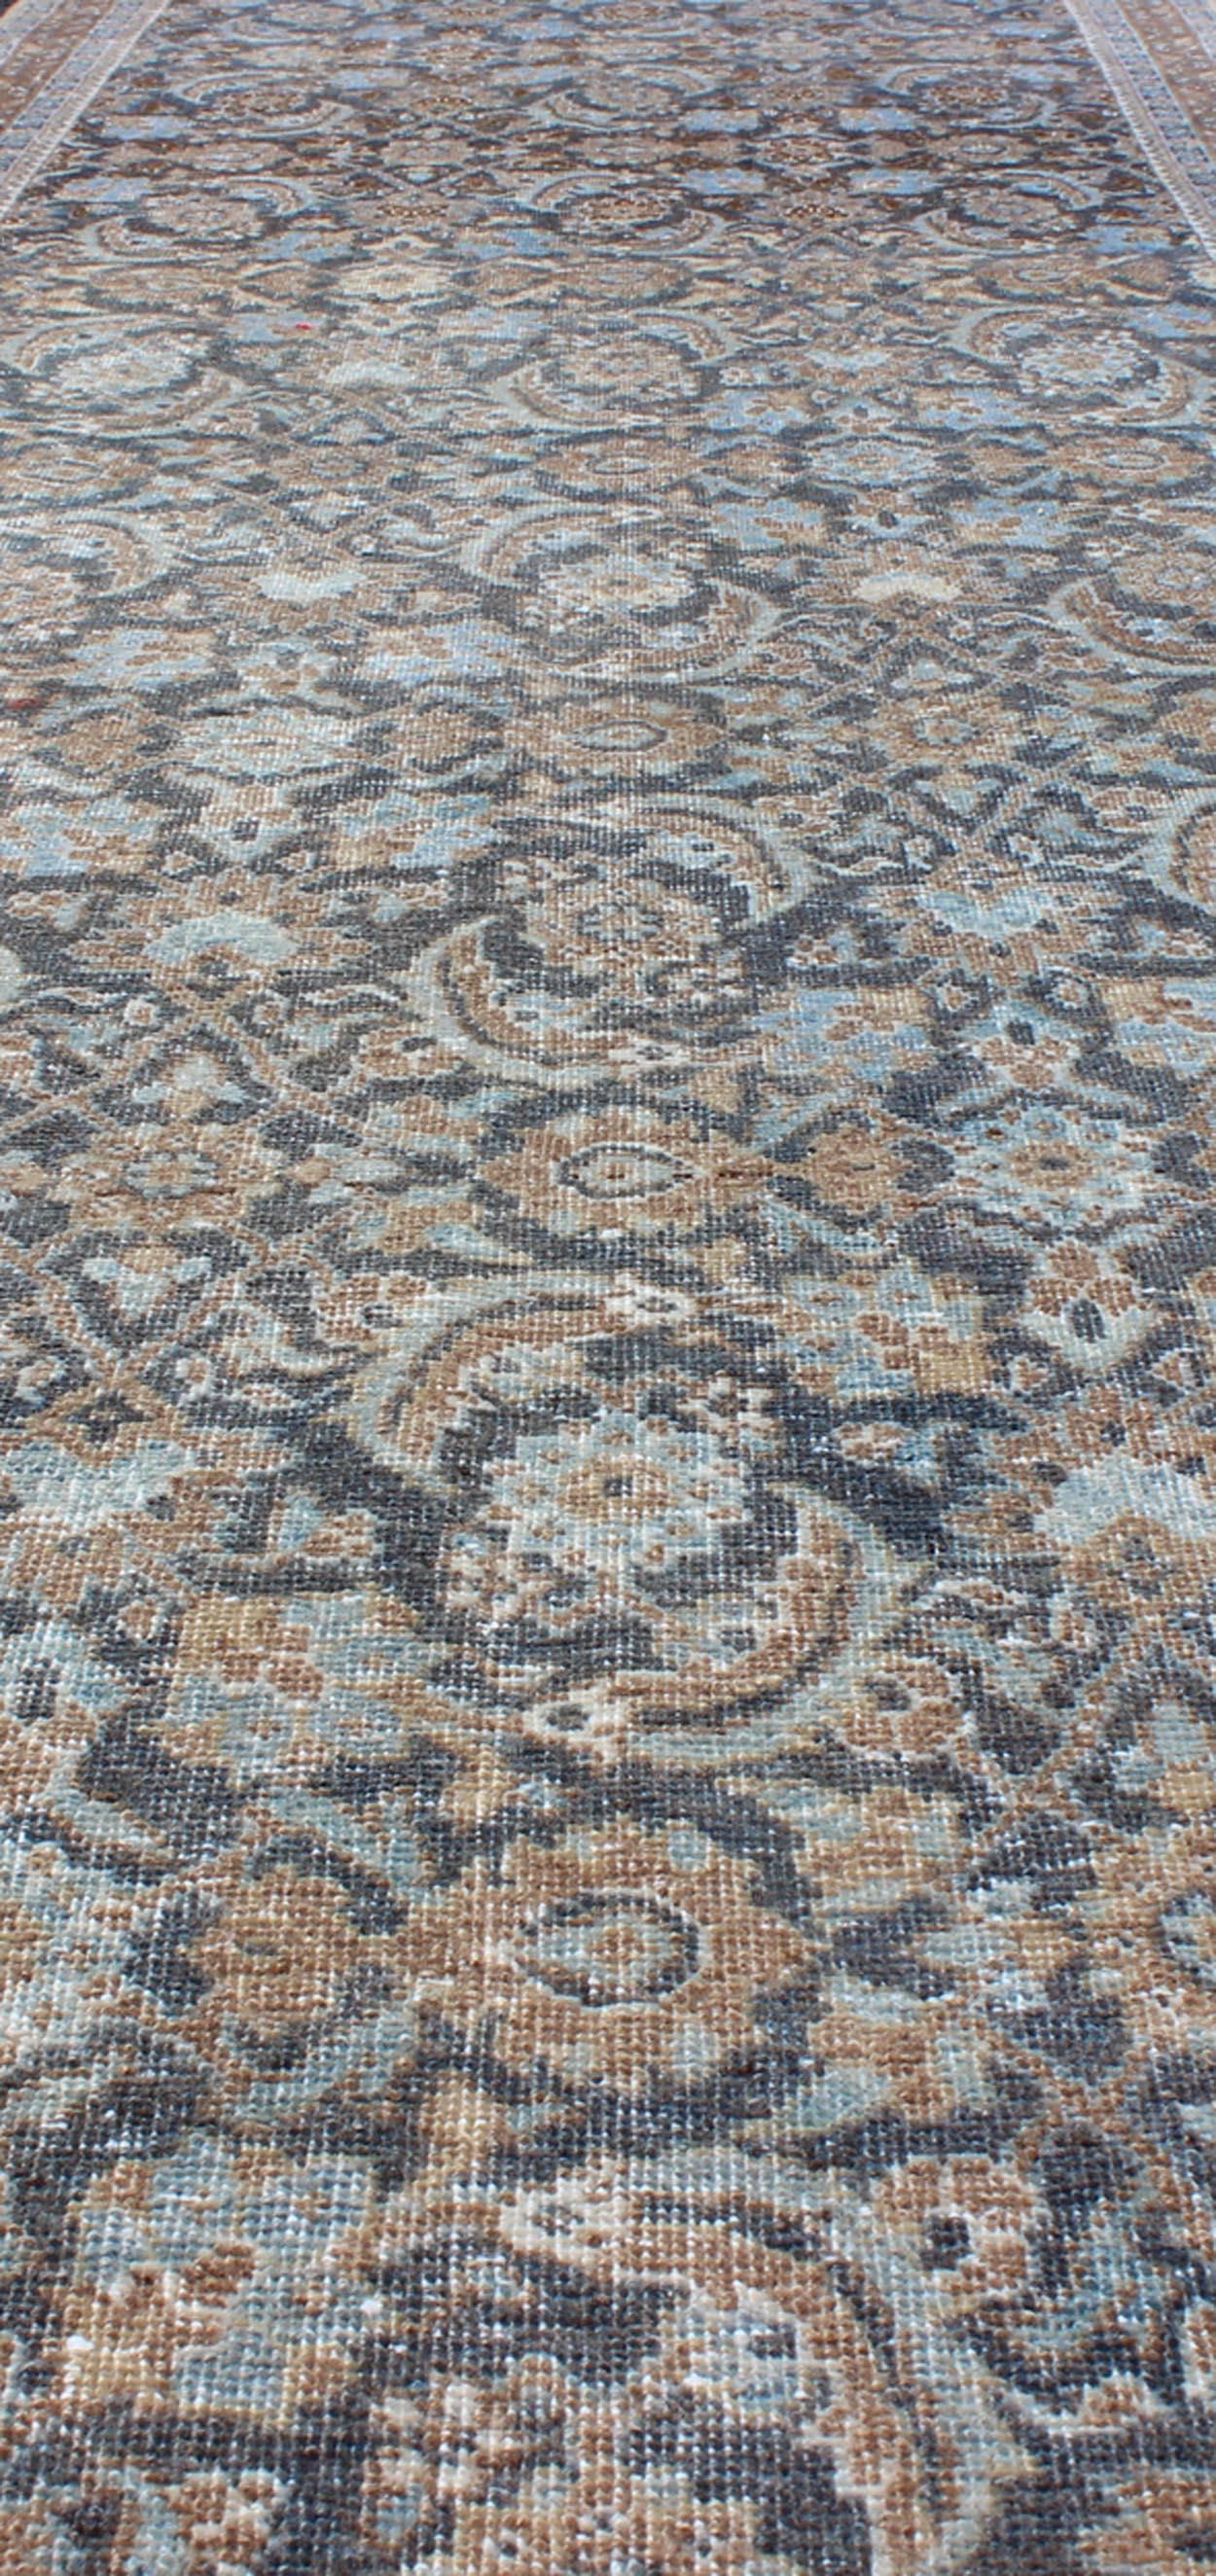 Vintage Persian Tabriz Runner with Ornate Floral Design in Blue and Taupe For Sale 6